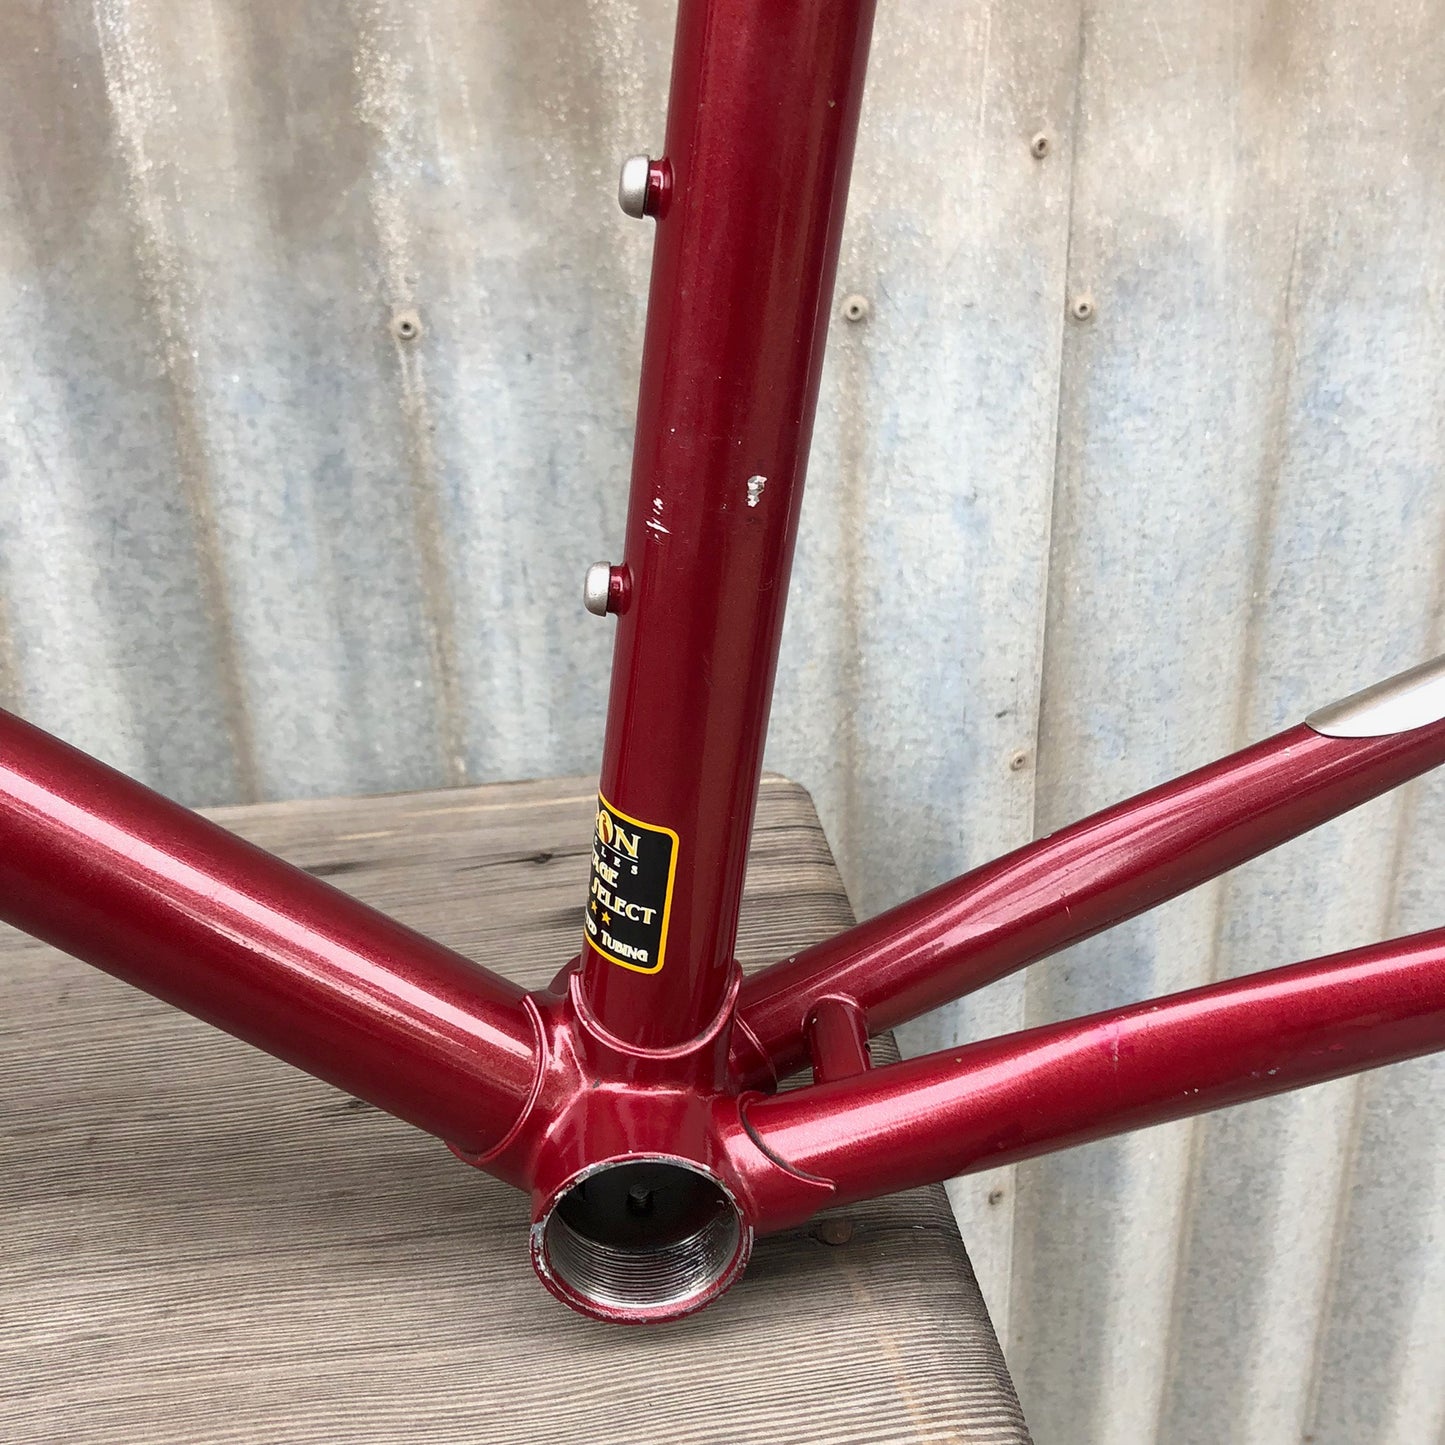 Heron Bicycle Frame - Waterford Rivendell Collaboration